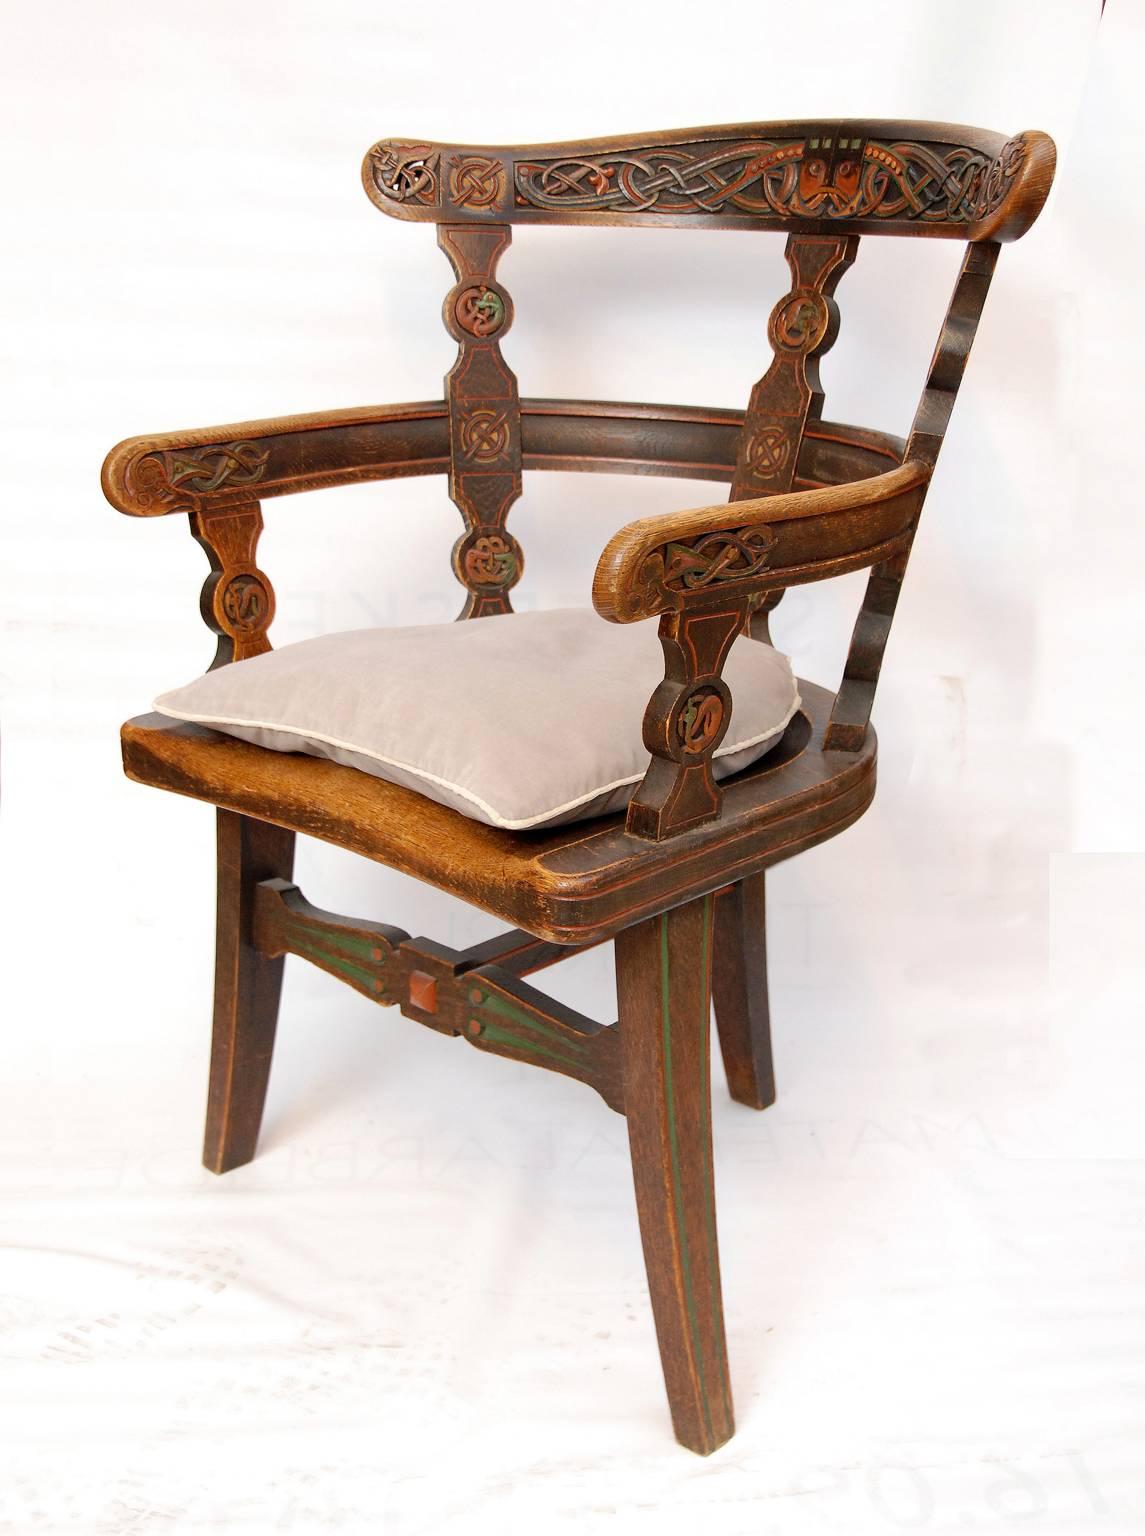 Attributed to Lars Kinsarvik. The chair represents a beautiful example of what was called the 